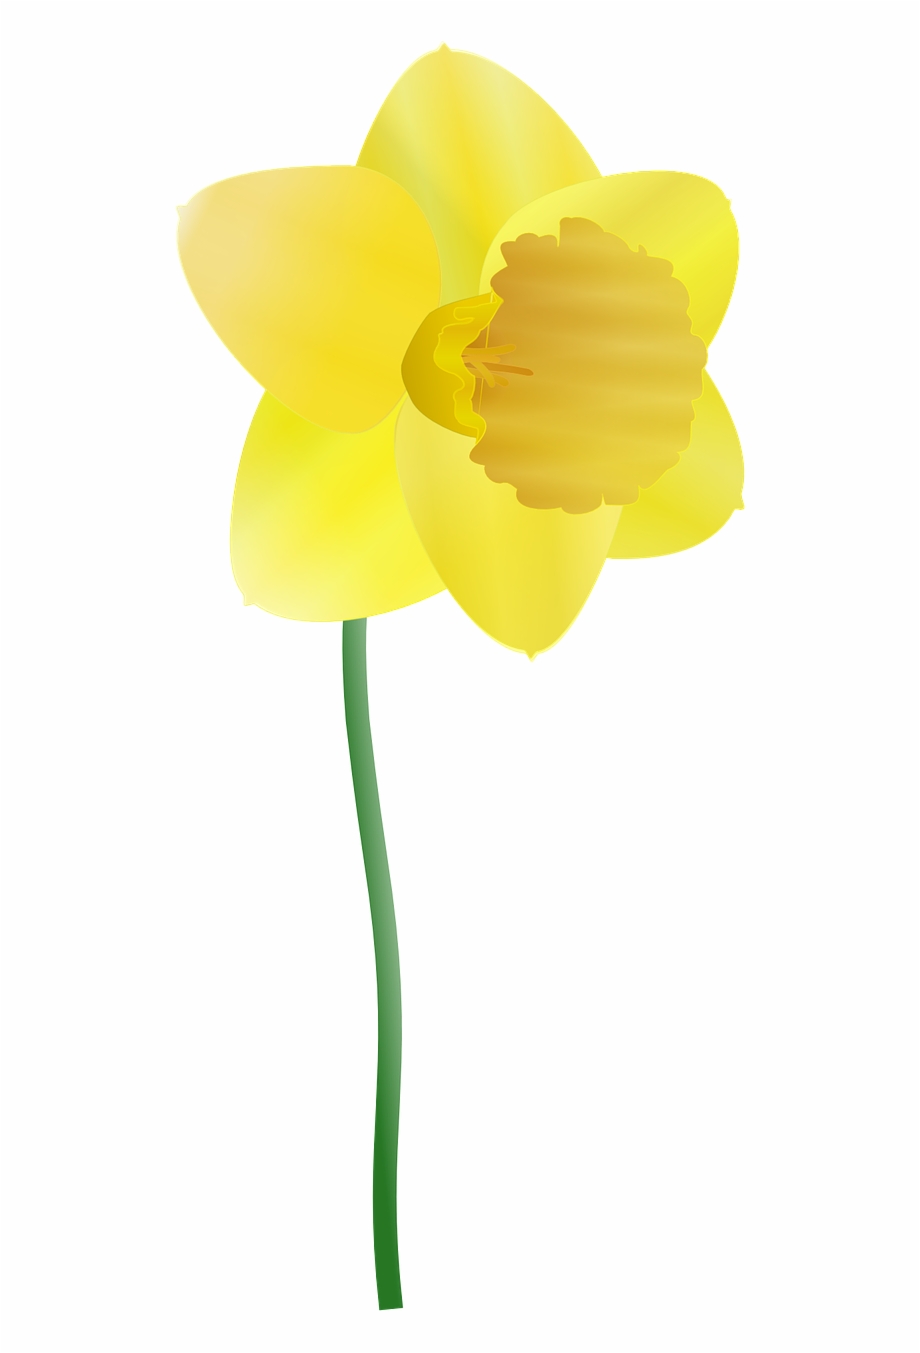 Daffodil Yellow Flower Spring Png Image Daffodil Clipart